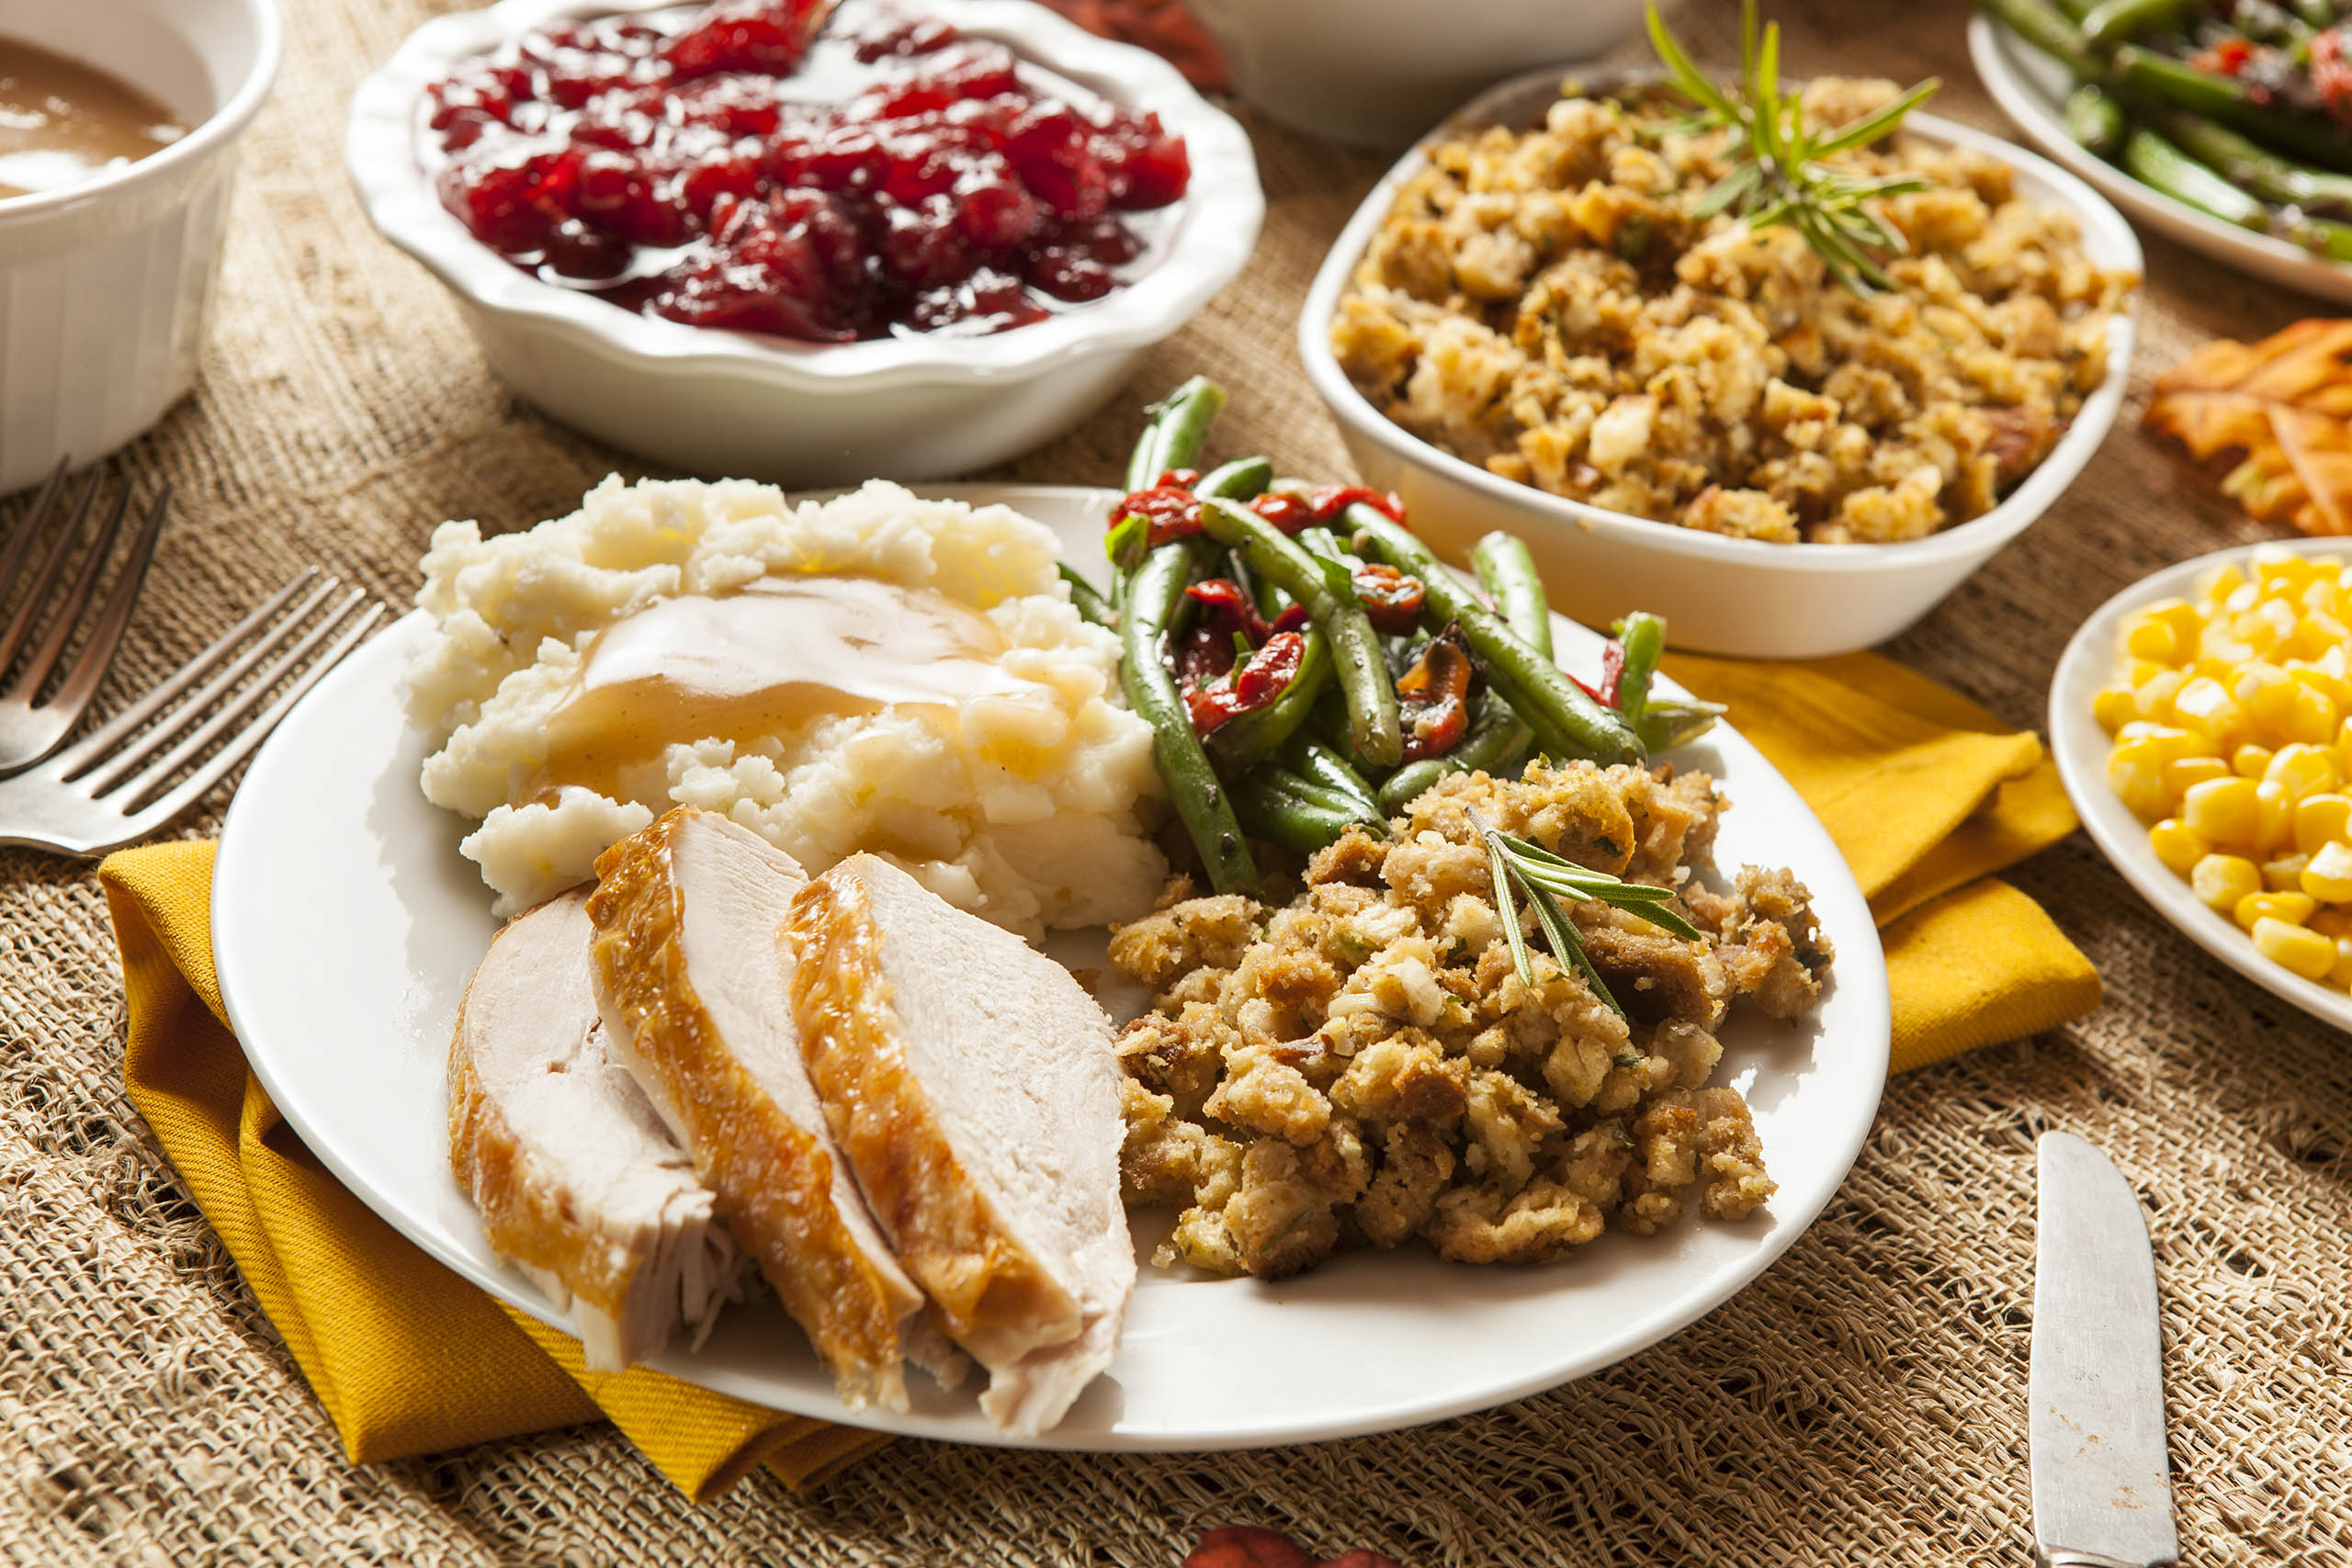 Close-up photo of Thanksgiving dinner with sliced turkey, mashed potatoes, cranberry sauce, stuffing, and vegetables.